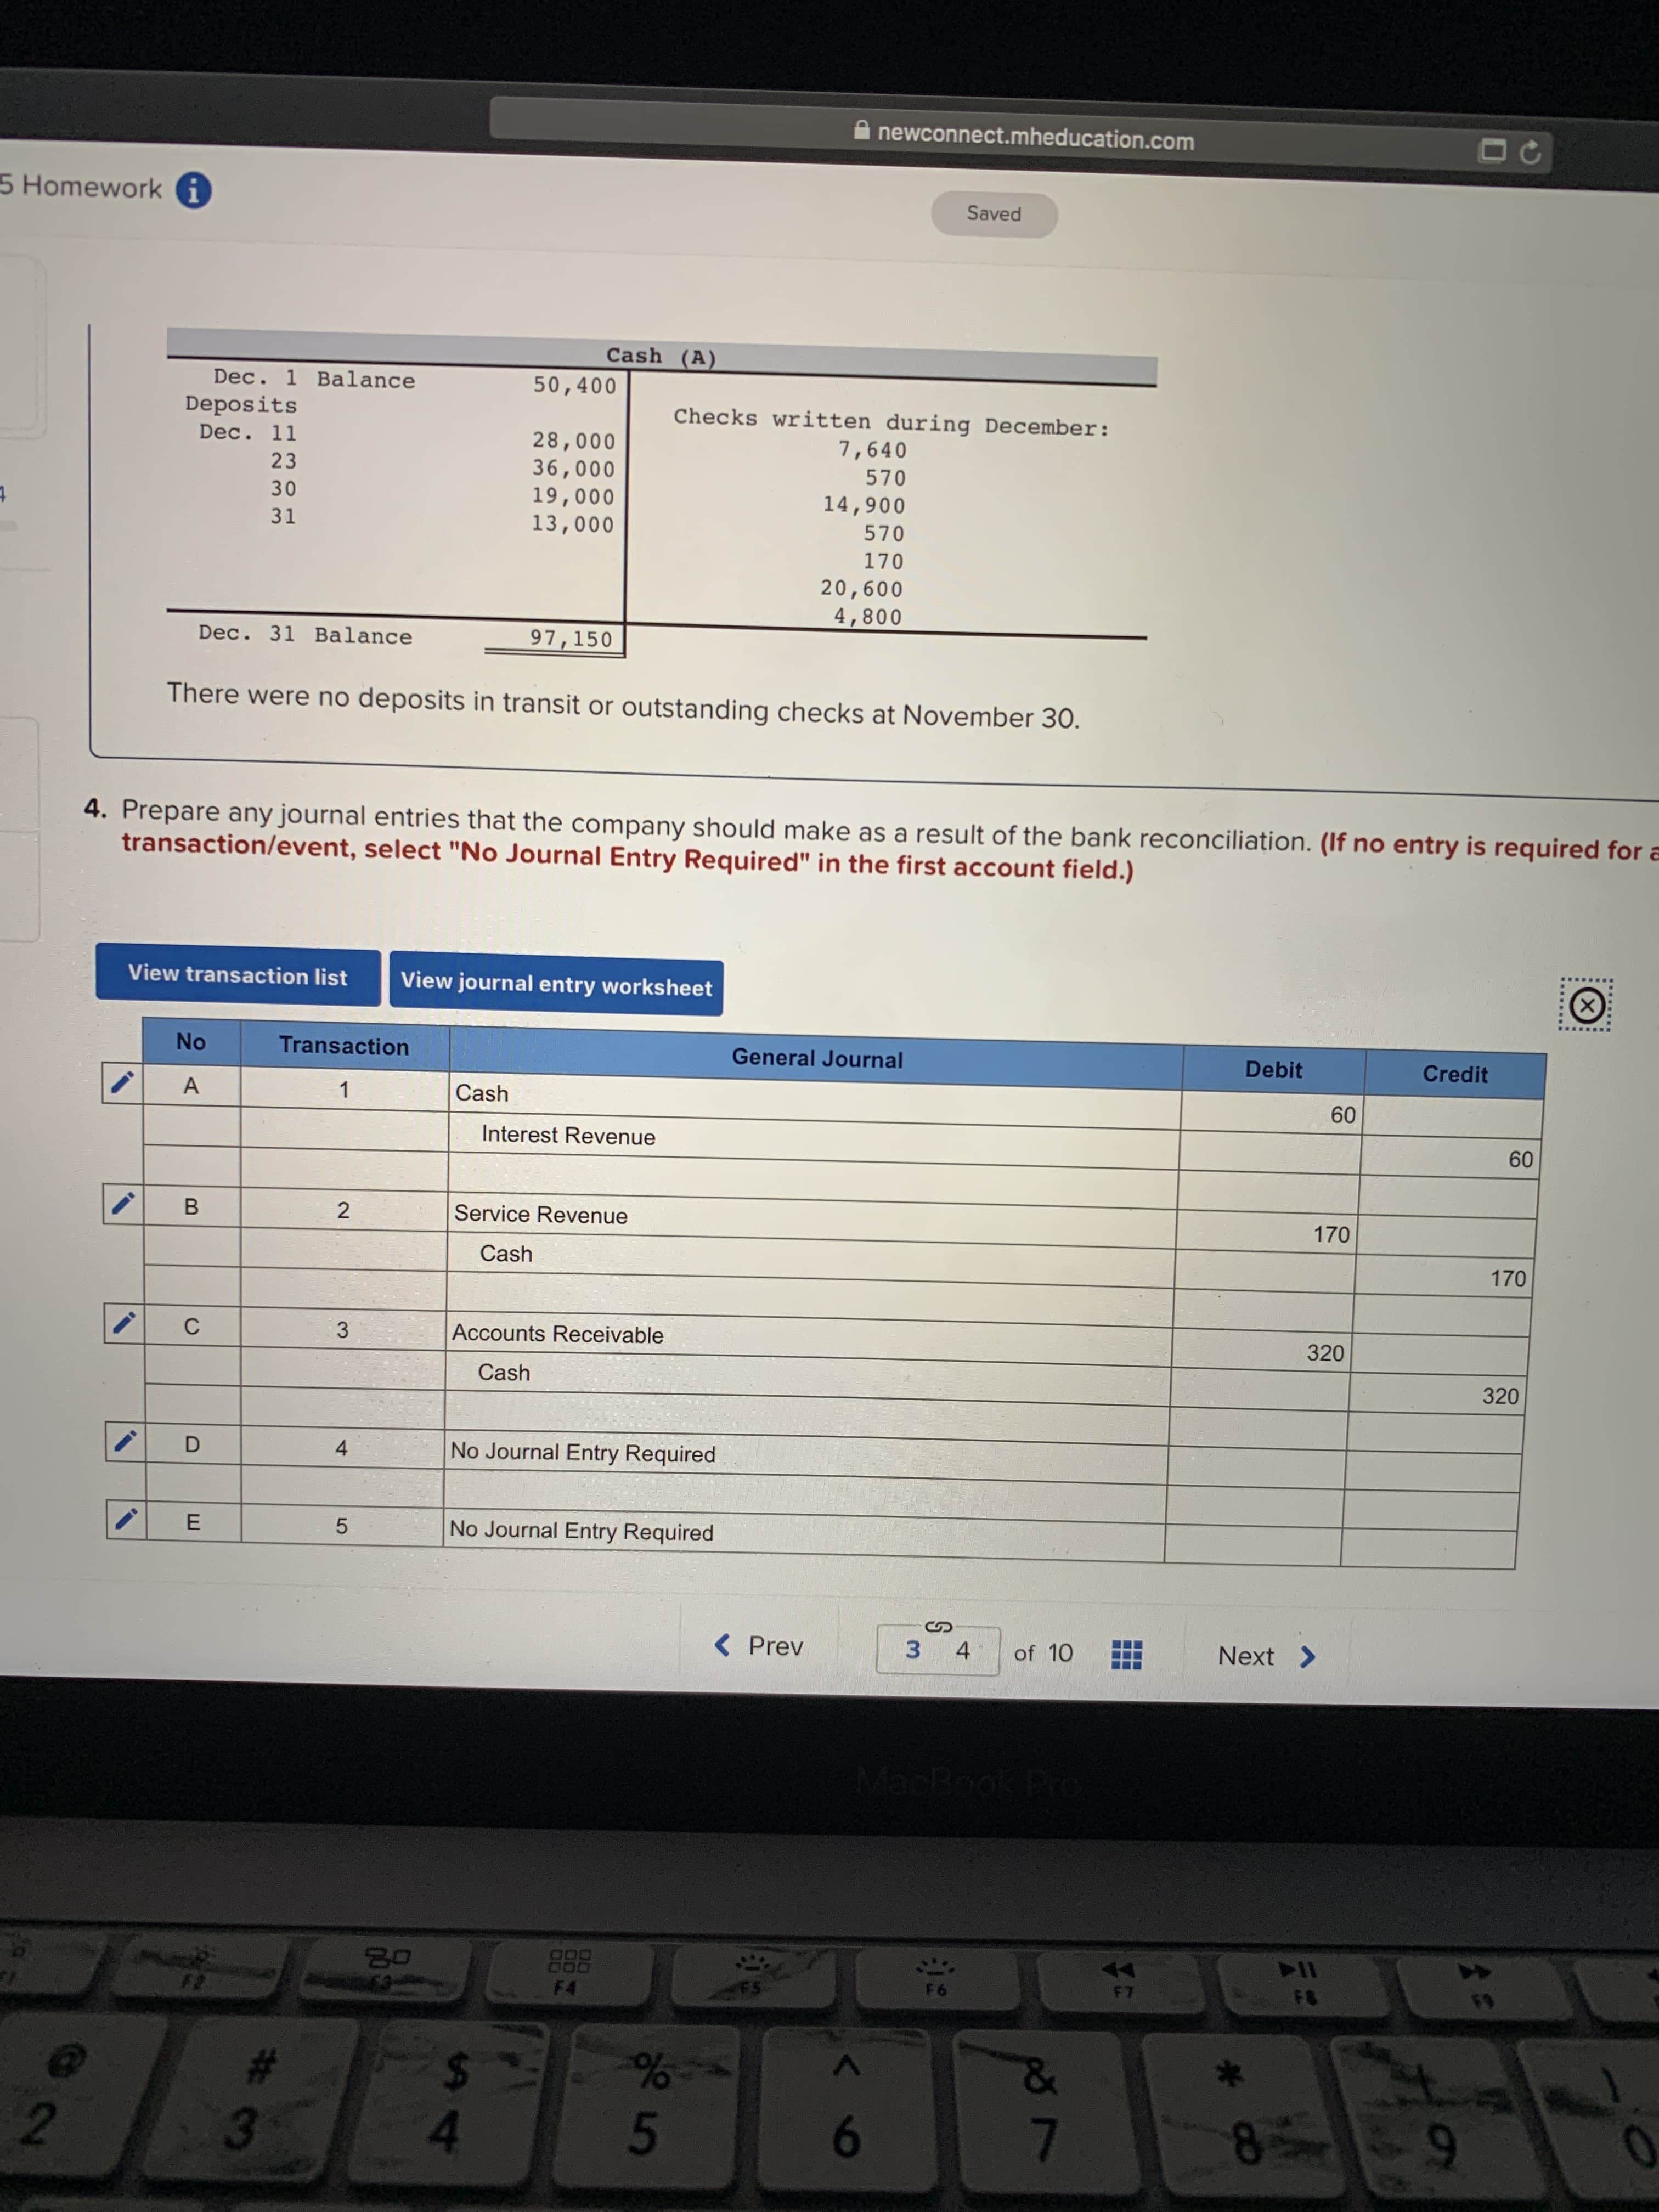 newconnect.mheducation.com
5 Homeworki
Saved
Cash (A)
Dec. 1 Balance
50,400
Deposits
Checks written during December:
7,640
Dec. 11
28,000
36,000
19,000
13,000
23
570
30
14,900
4
31
570
170
20,600
4,800
Dec. 31 Balance
97,150
There were no deposits in transit or outstanding checks at November 30.
4. Prepare any journal entries that the company should make as a result of the bank reconciliation. (If no entry is required for a
transaction/event, select "No Journal Entry Required" in the first account field.)
View transaction list
View journal entry worksheet
X
No
Transaction
General Journal
Debit
Credit
A
Cash
60
Interest Revenue
60
B
2
Service Revenue
170
Cash
170
Accounts Receivable
C
3
320
Cash
320
No Journal Entry Required
D
4
No Journal Entry Required
E
< Prev
Next>
3
4
of 10
NacBook Pro
B0
F7
FB
F6
FS
FD
F2
F4
%
5
&
2
7
6
8
t
LO
3
LLI
